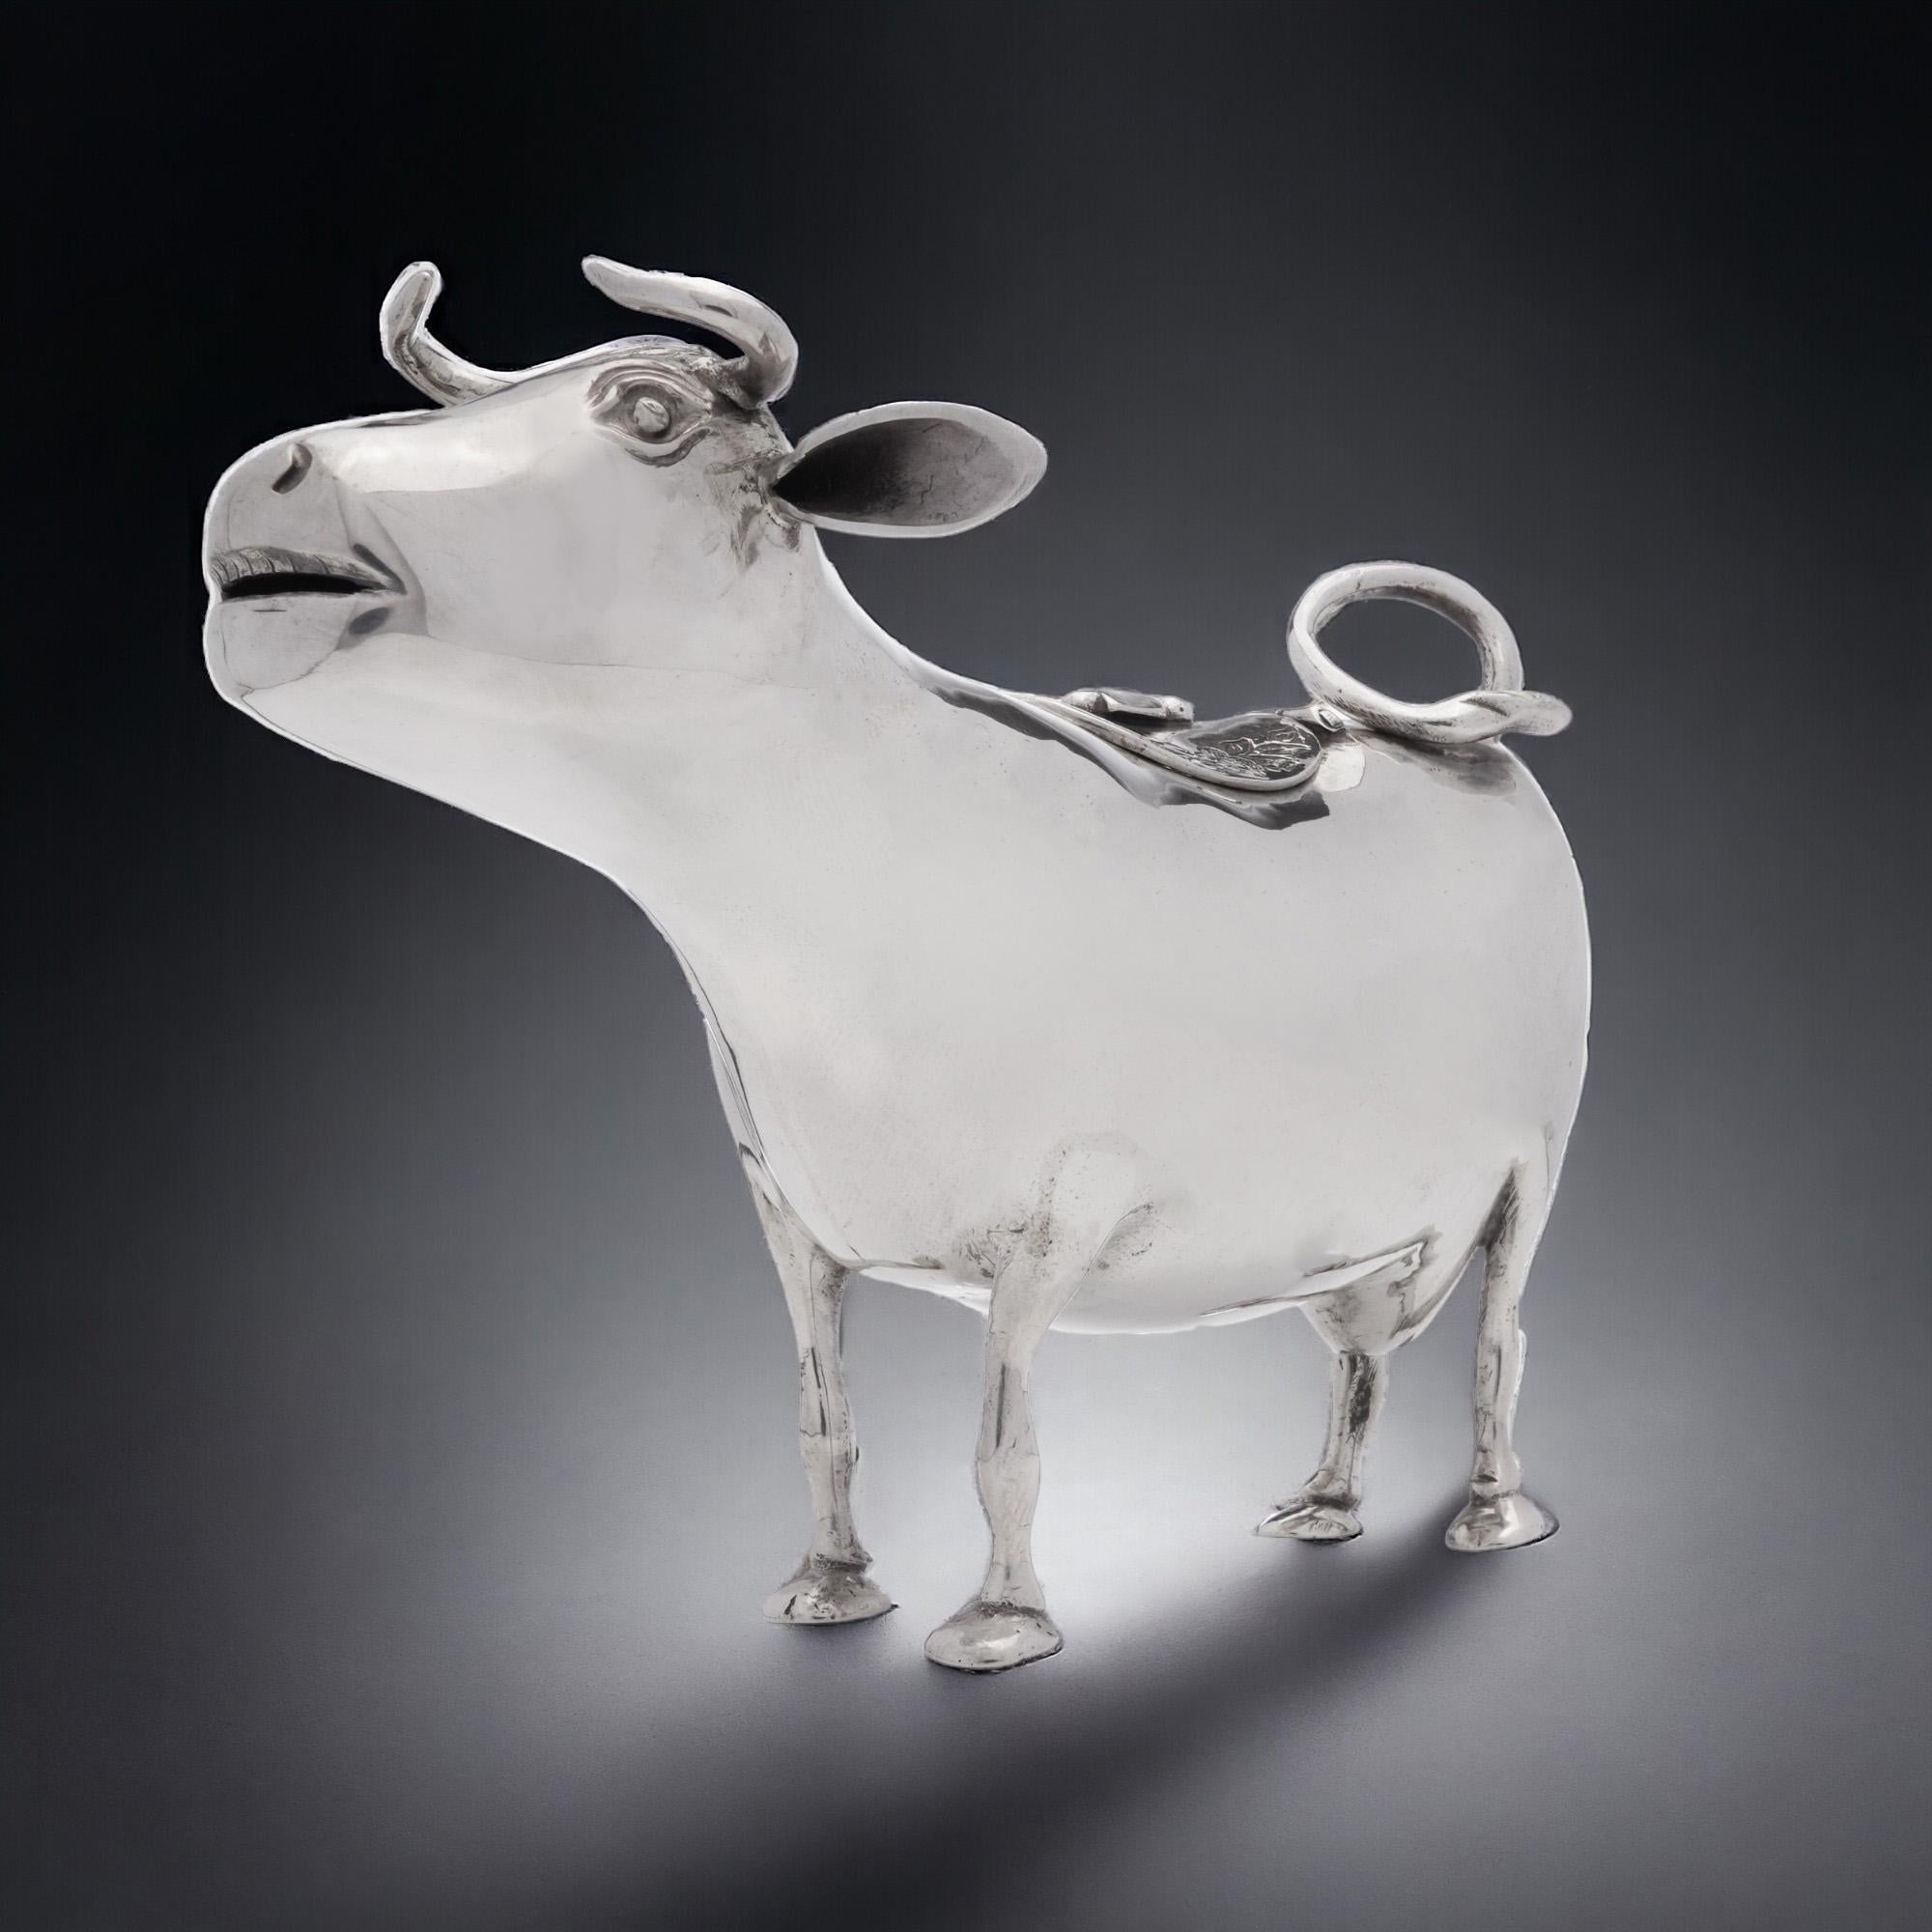 Antique Dutch Cow Shaped Creamer - Early 20th Century
Made in Netherlands, Circa 1910
Maker: DH
Fully hallmarked.

Dimensions -
Length: 13.7 cm
Width: 7.5 cm
Height: 10 cm
Weight: 141 grams

Condition: General wear and tear, great overall condition.